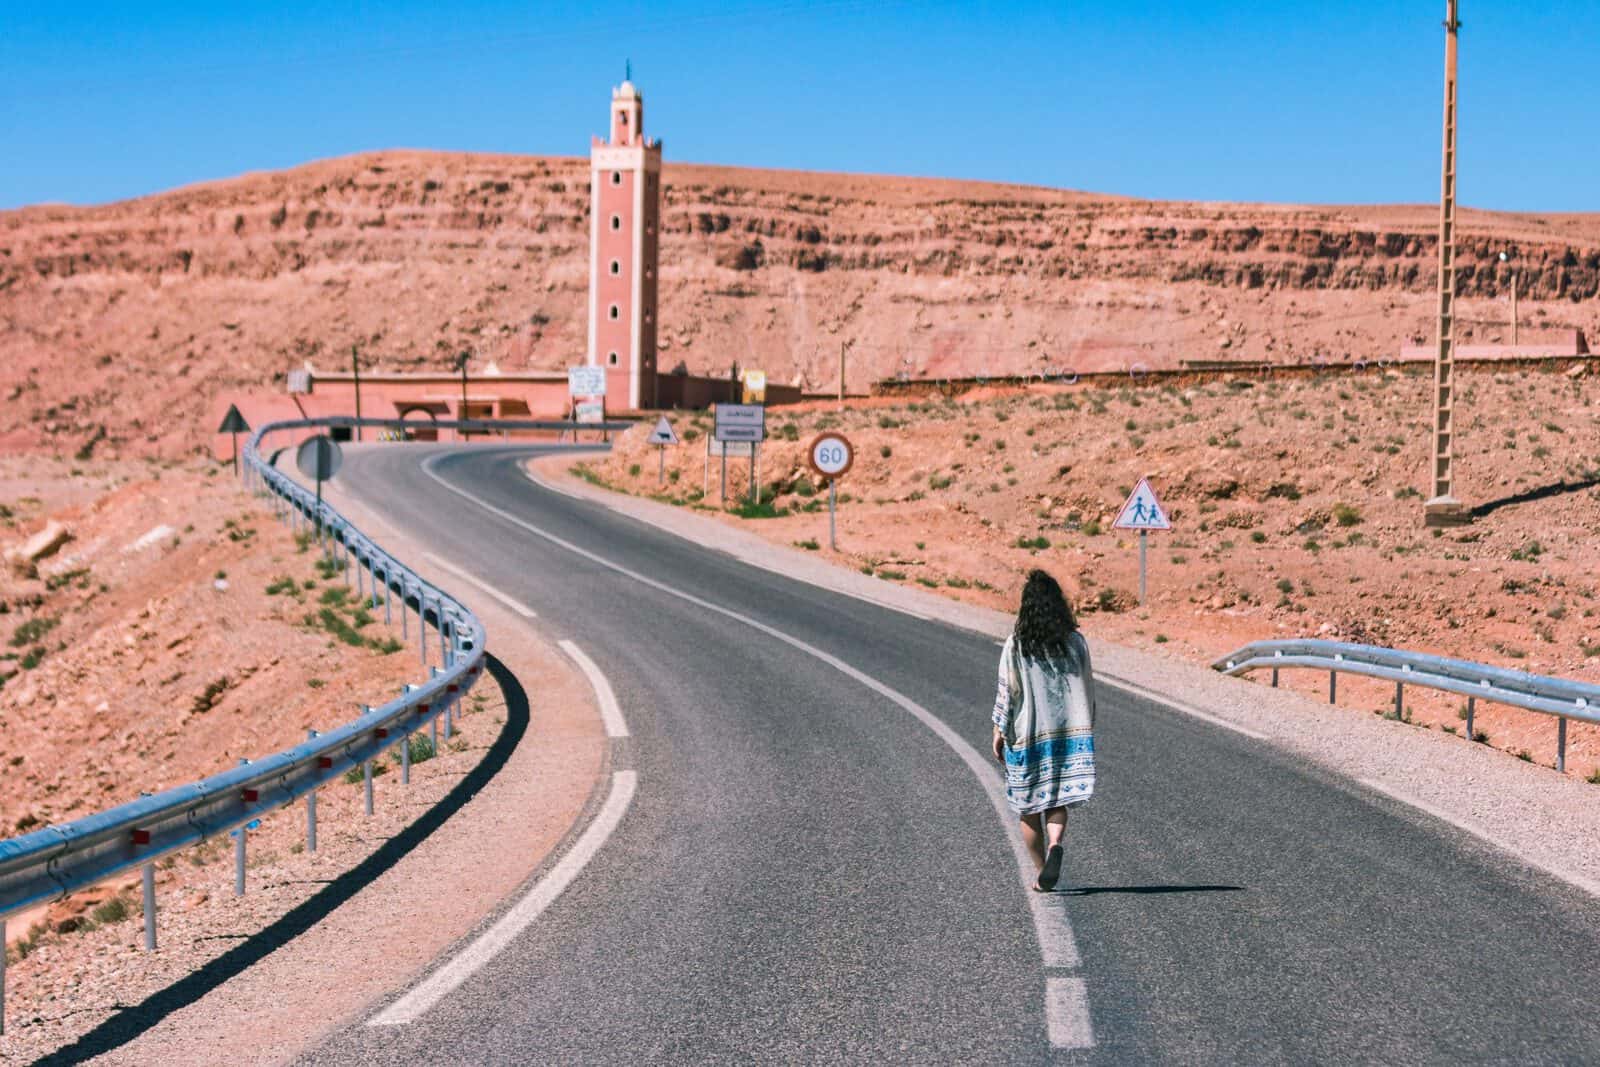 A Magical Backpacking Morocco Itinerary for 1, 2, or 3 Weeks